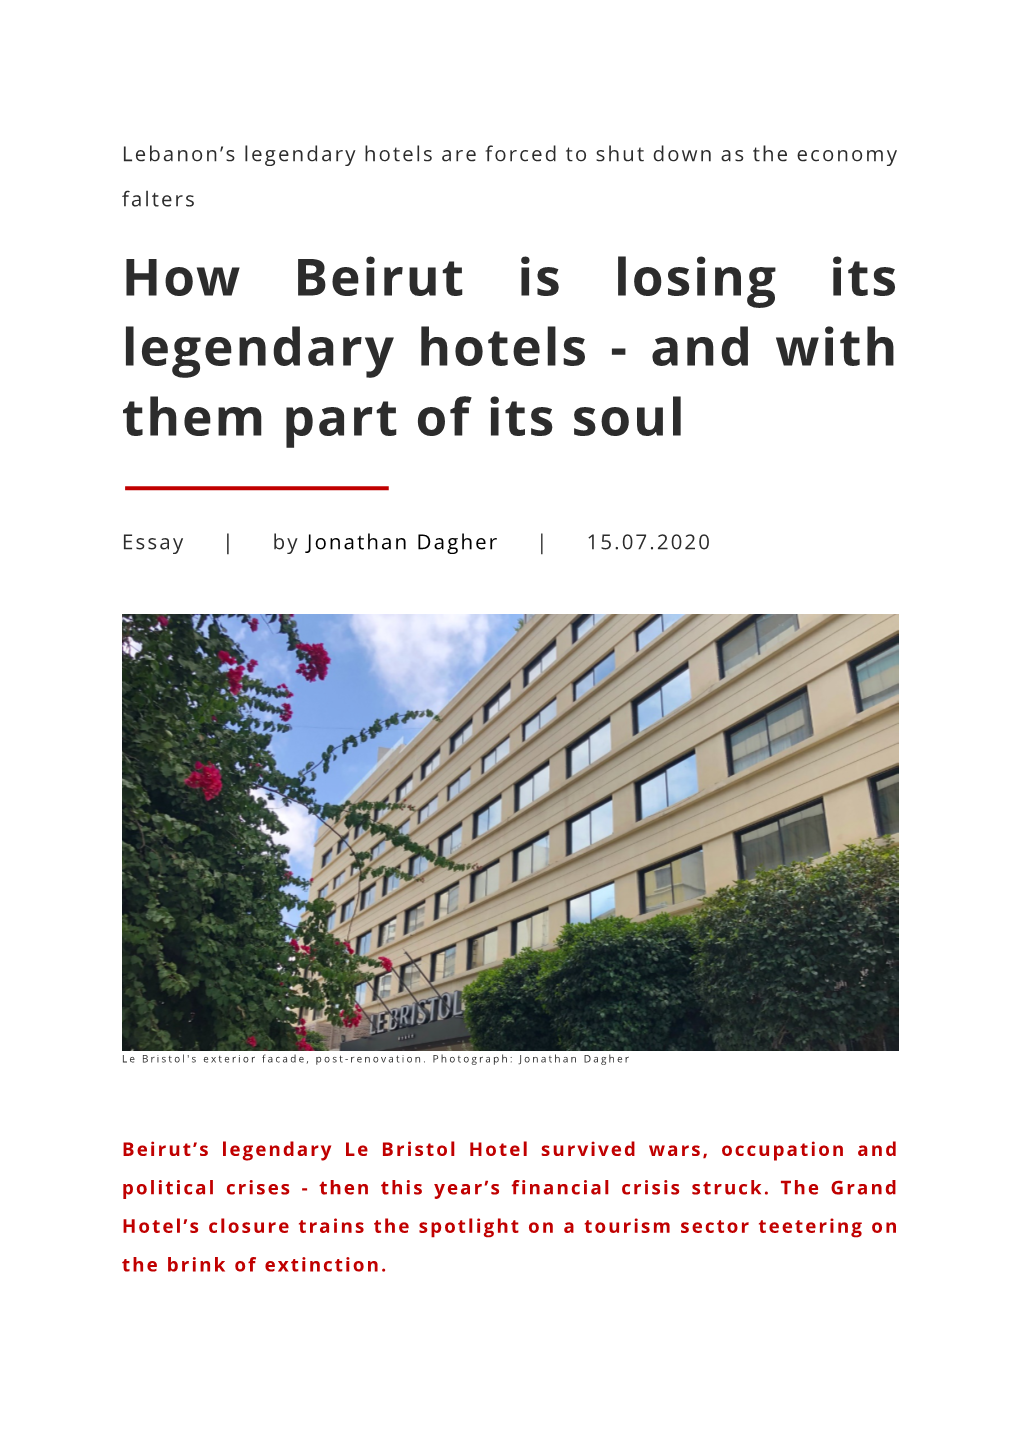 How Beirut Is Losing Its Legendary Hotels - and with Them Part of Its Soul